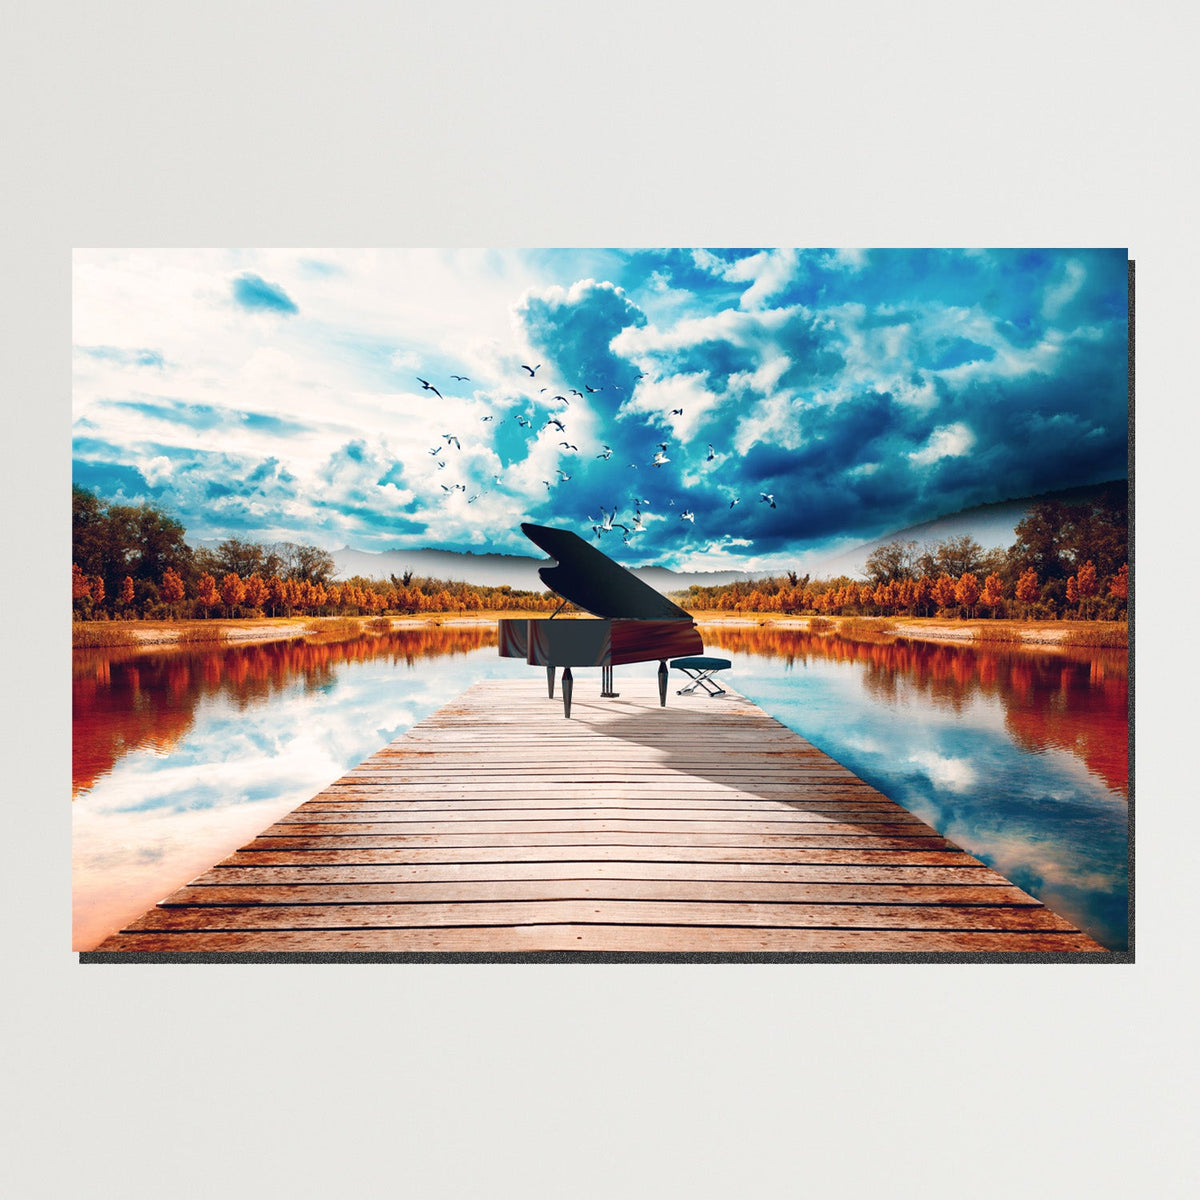 https://cdn.shopify.com/s/files/1/0387/9986/8044/products/PianoonthepierCanvasPrintStretched-Plain.jpg